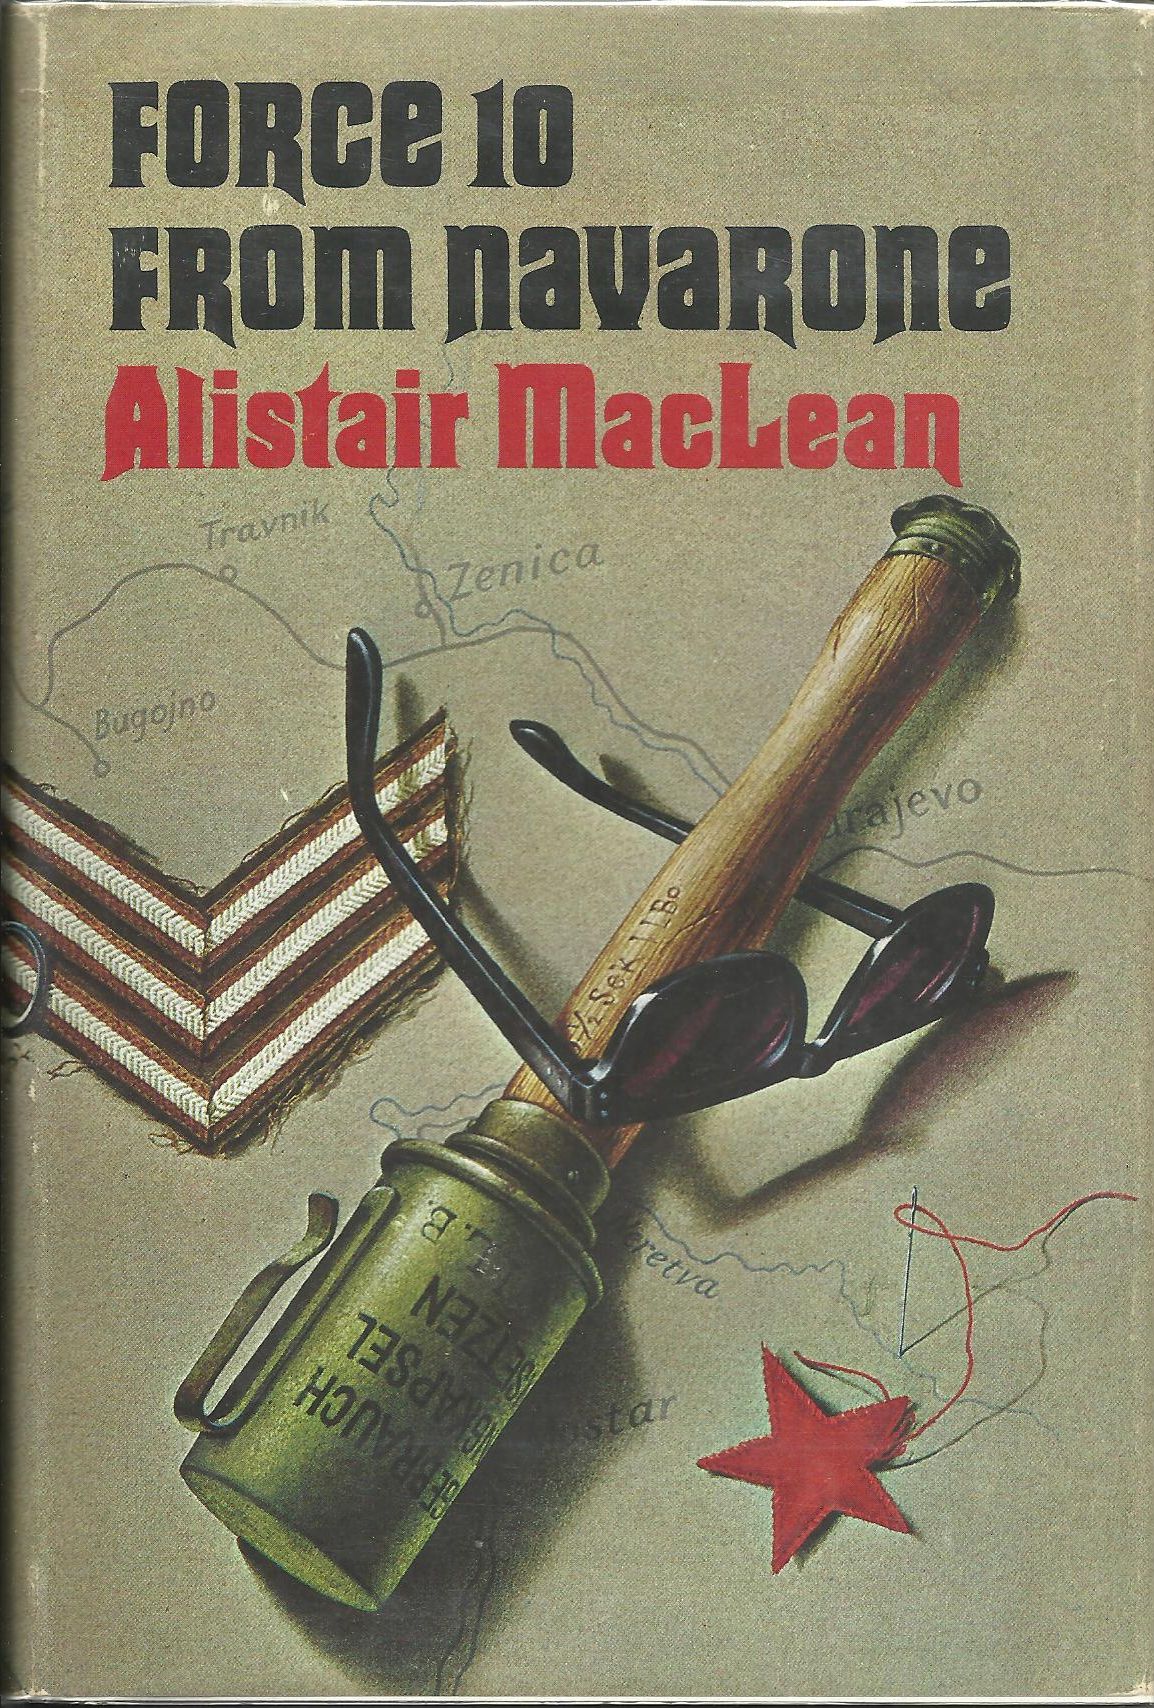 Force 10 from Navarone - US first edition